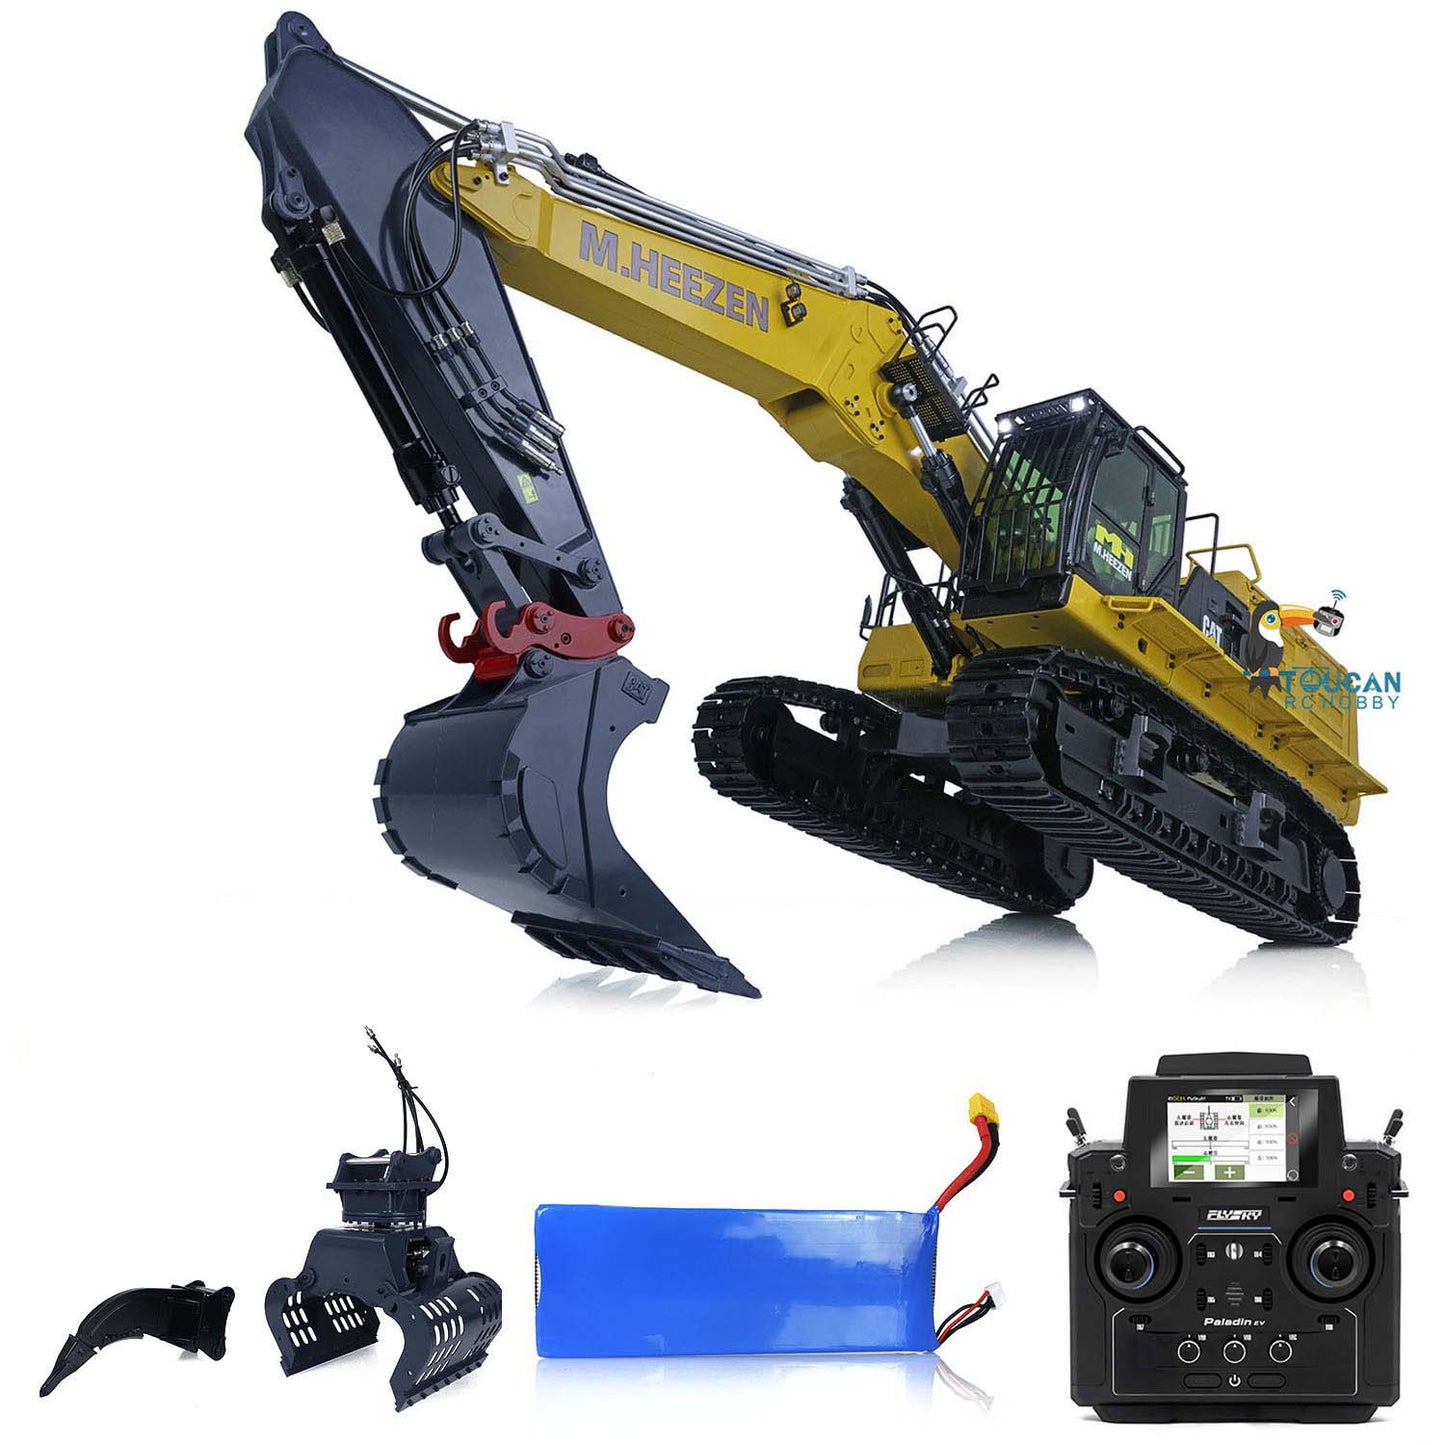 1/14 Metal Painted Assembled RC Hydraulic Demolition Excavator Remote Controlled Digger Trucks 374 UHD 2pcs Boom+1pc Arm